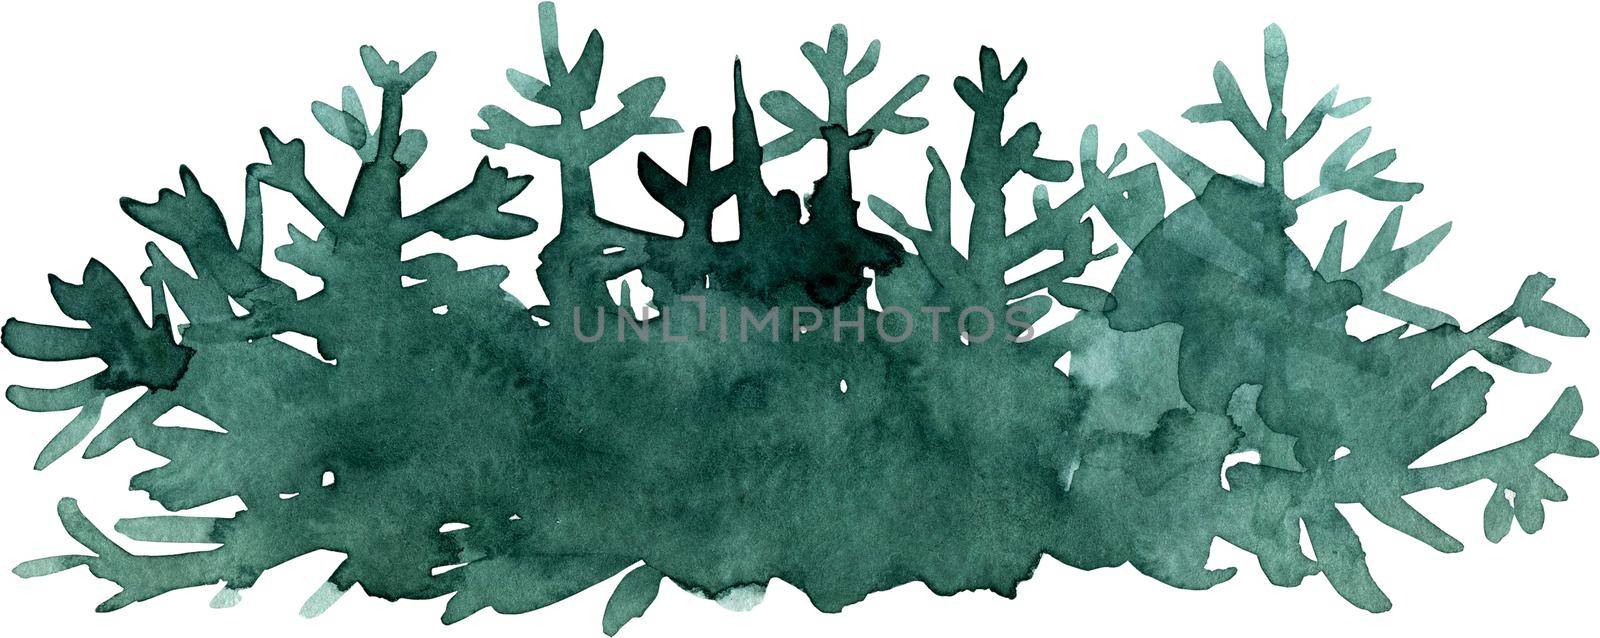 Watercolor landscape with fir trees, abstract nature background, forest template, hand drawn illustration